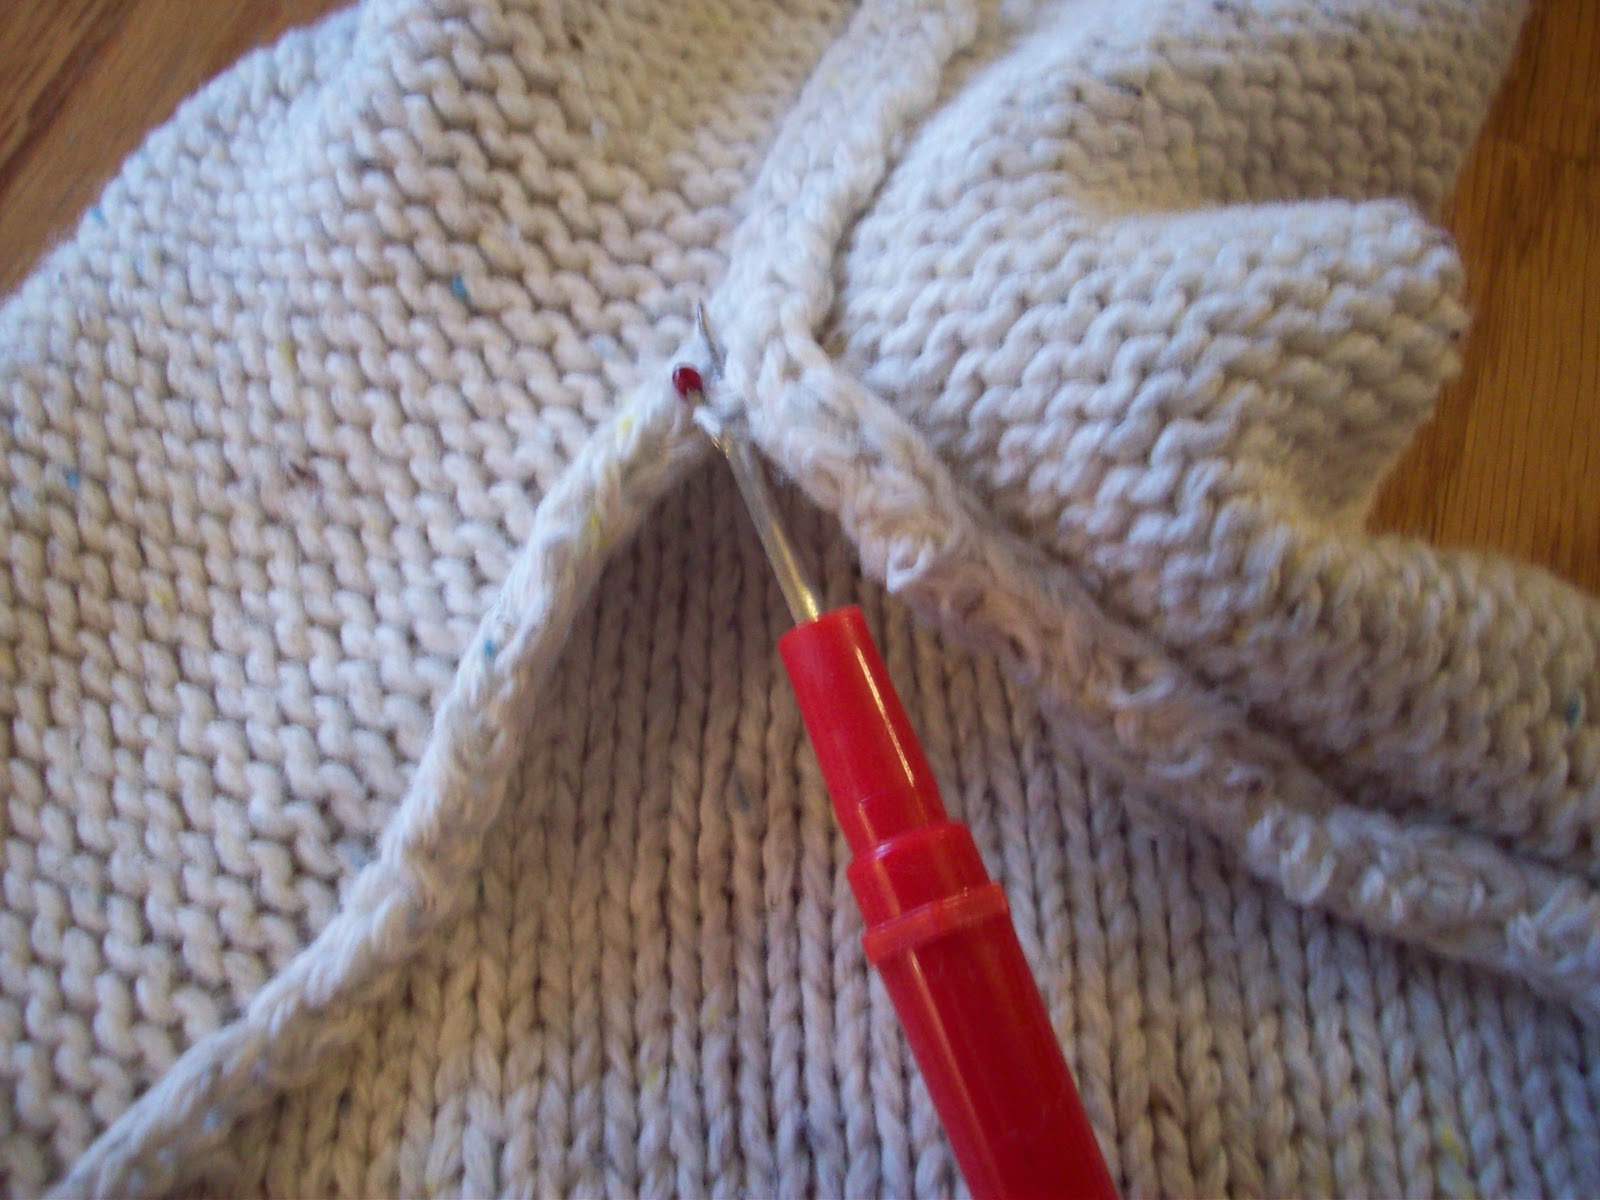 The Elusive Thread: Unravelings: How To Unravel A Sweater For Its Yarn